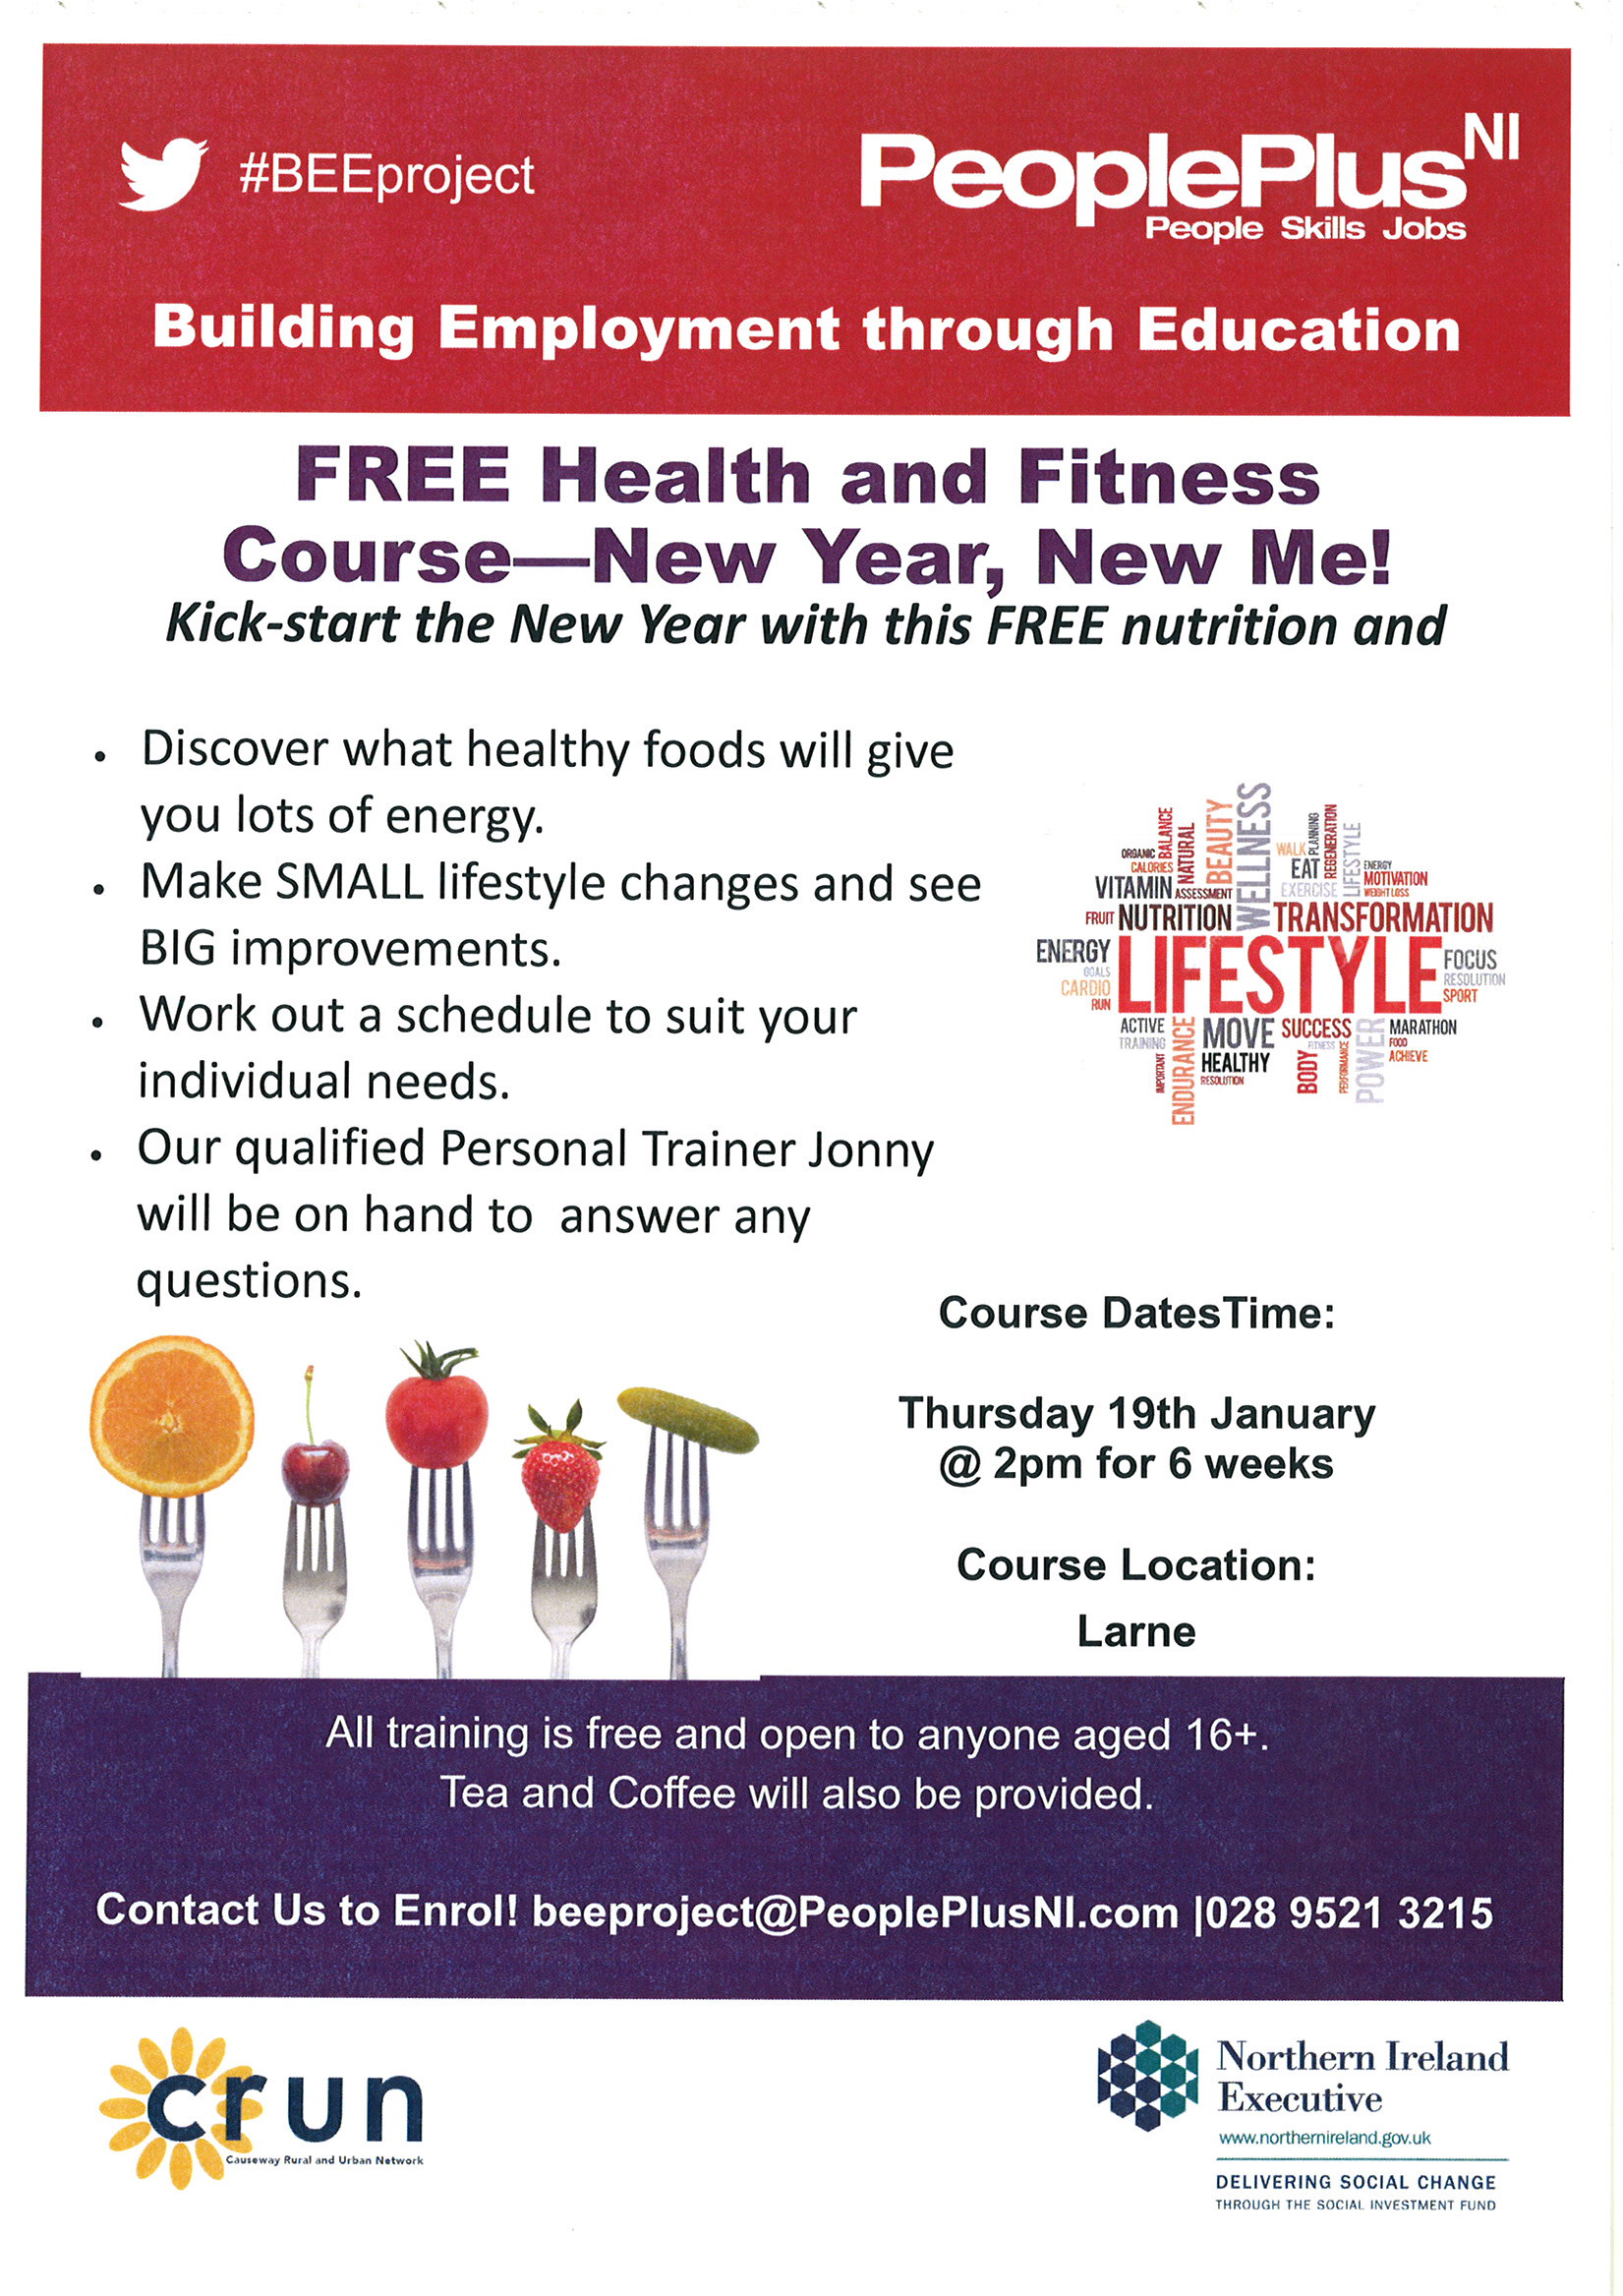 Free 6 Week Health and Fitness Class - Larne